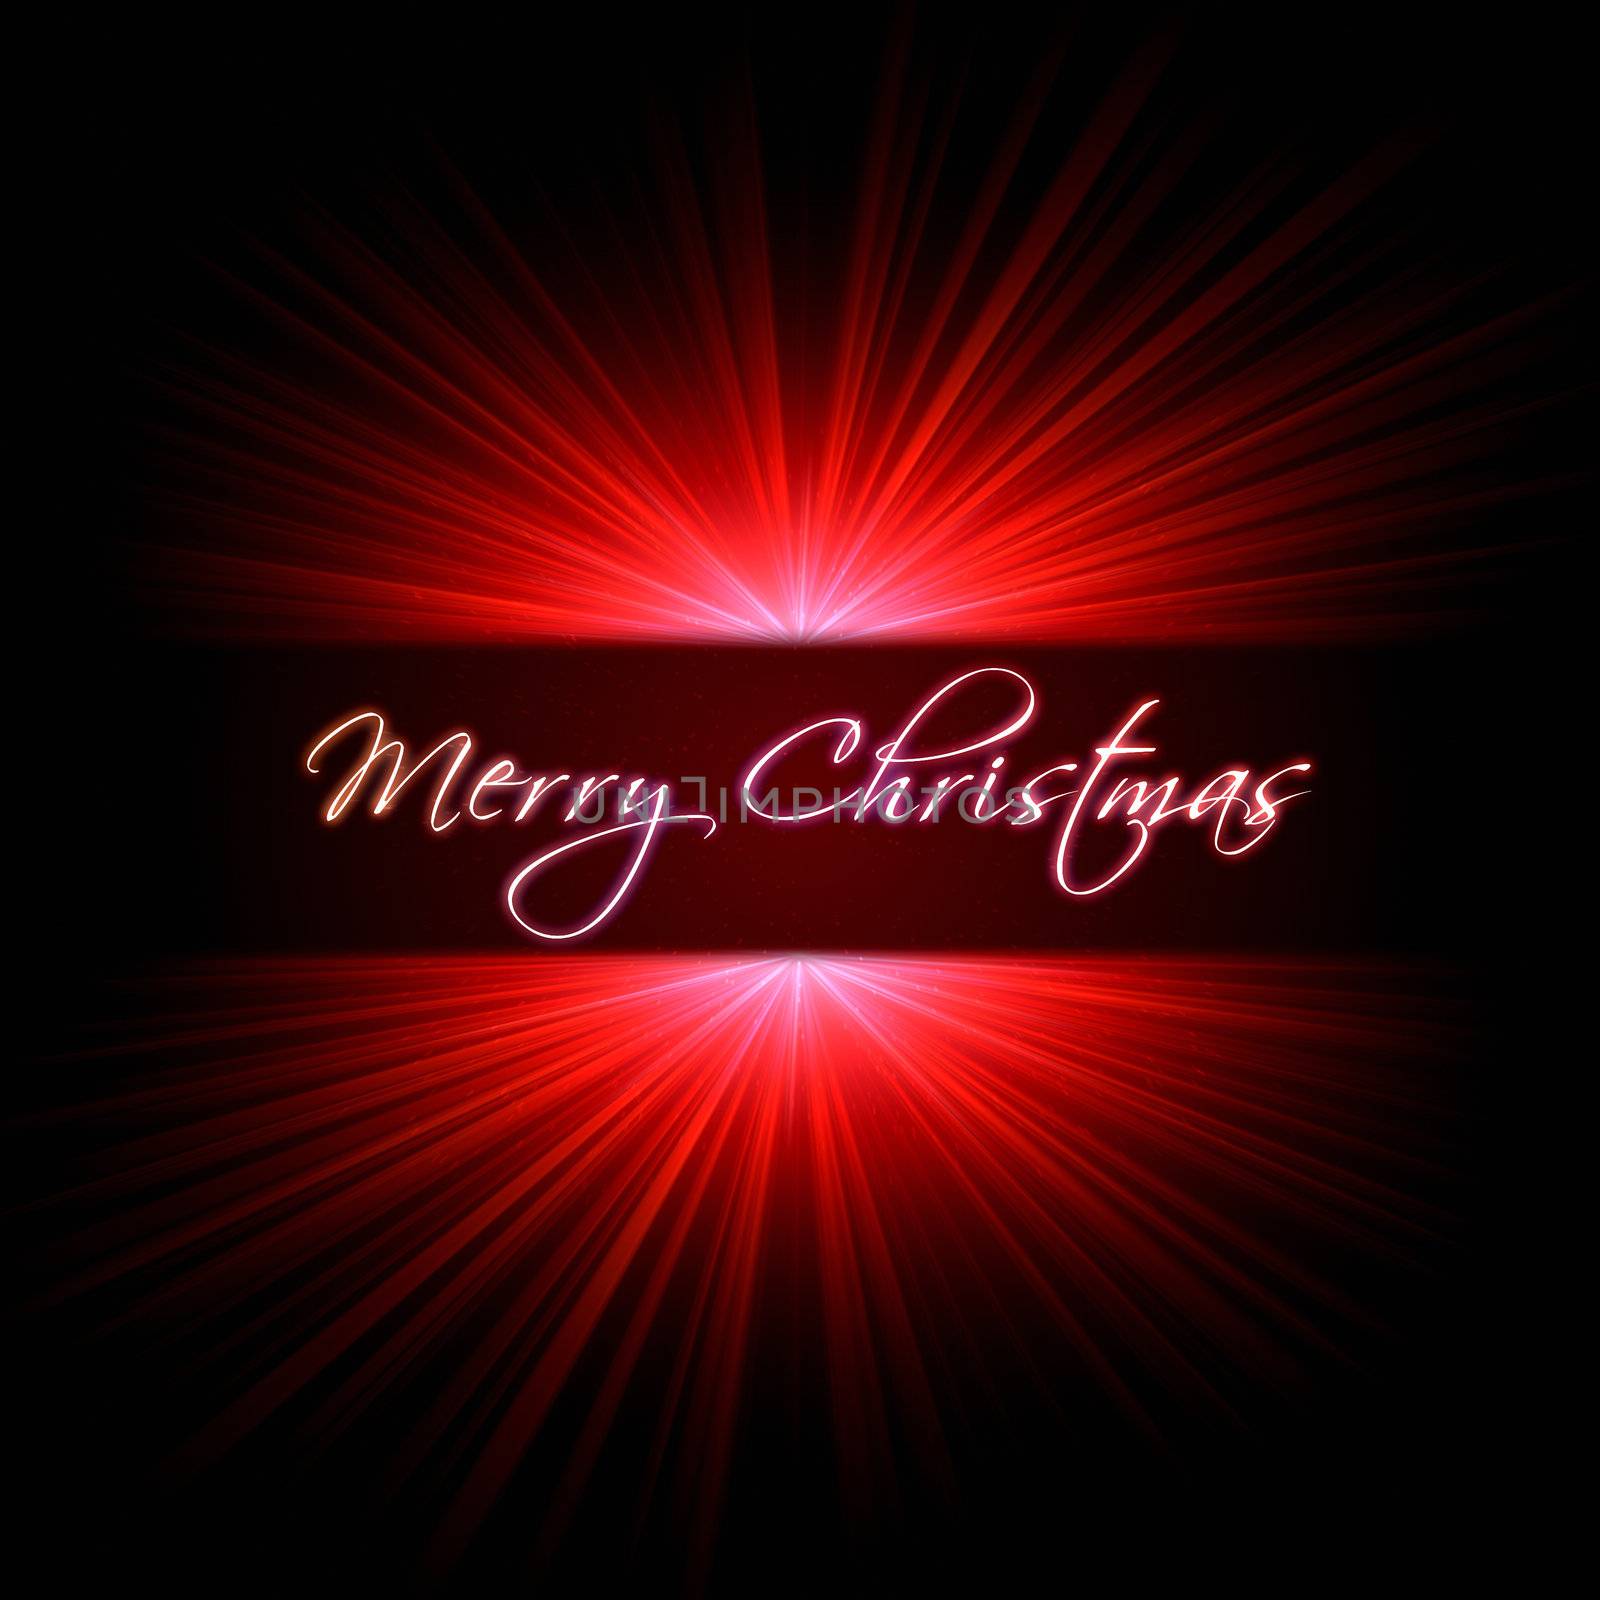 merry christmas with red light rays over dark background